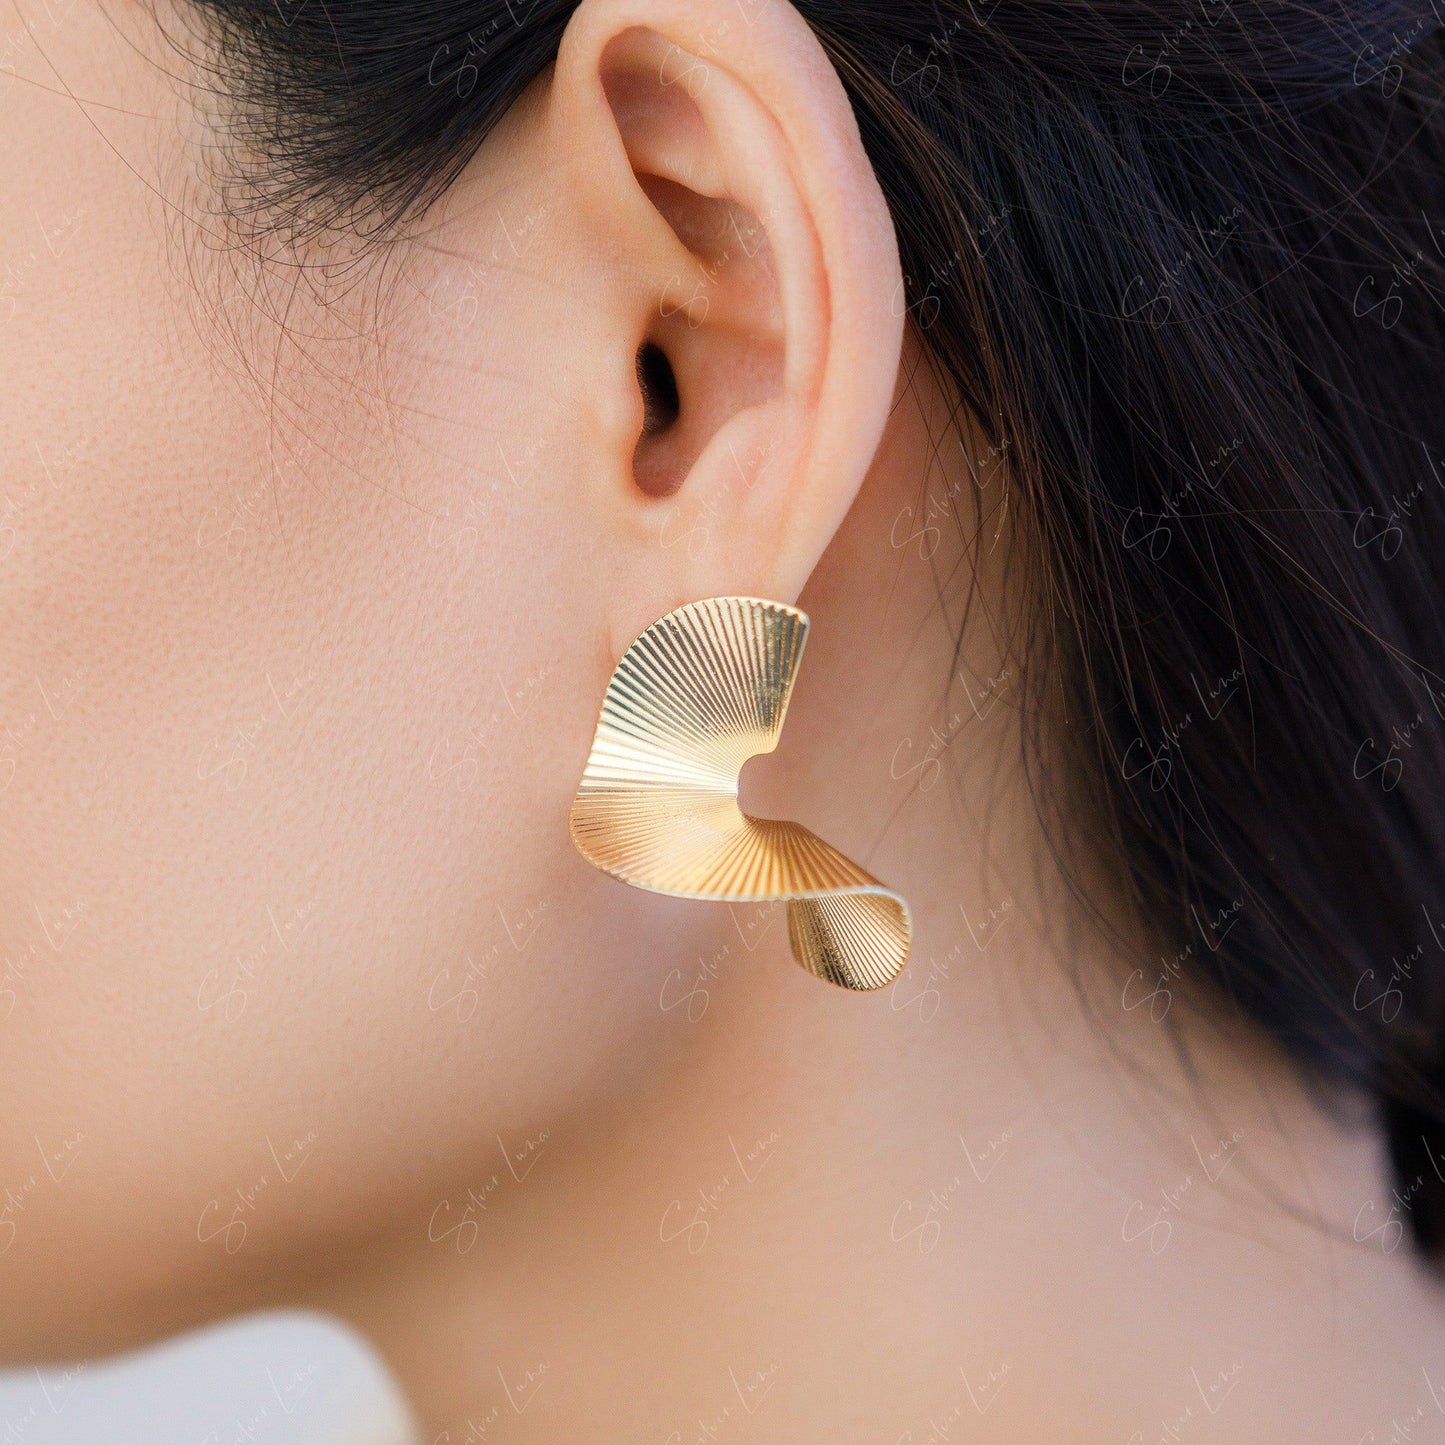 pencil shave statement earrings